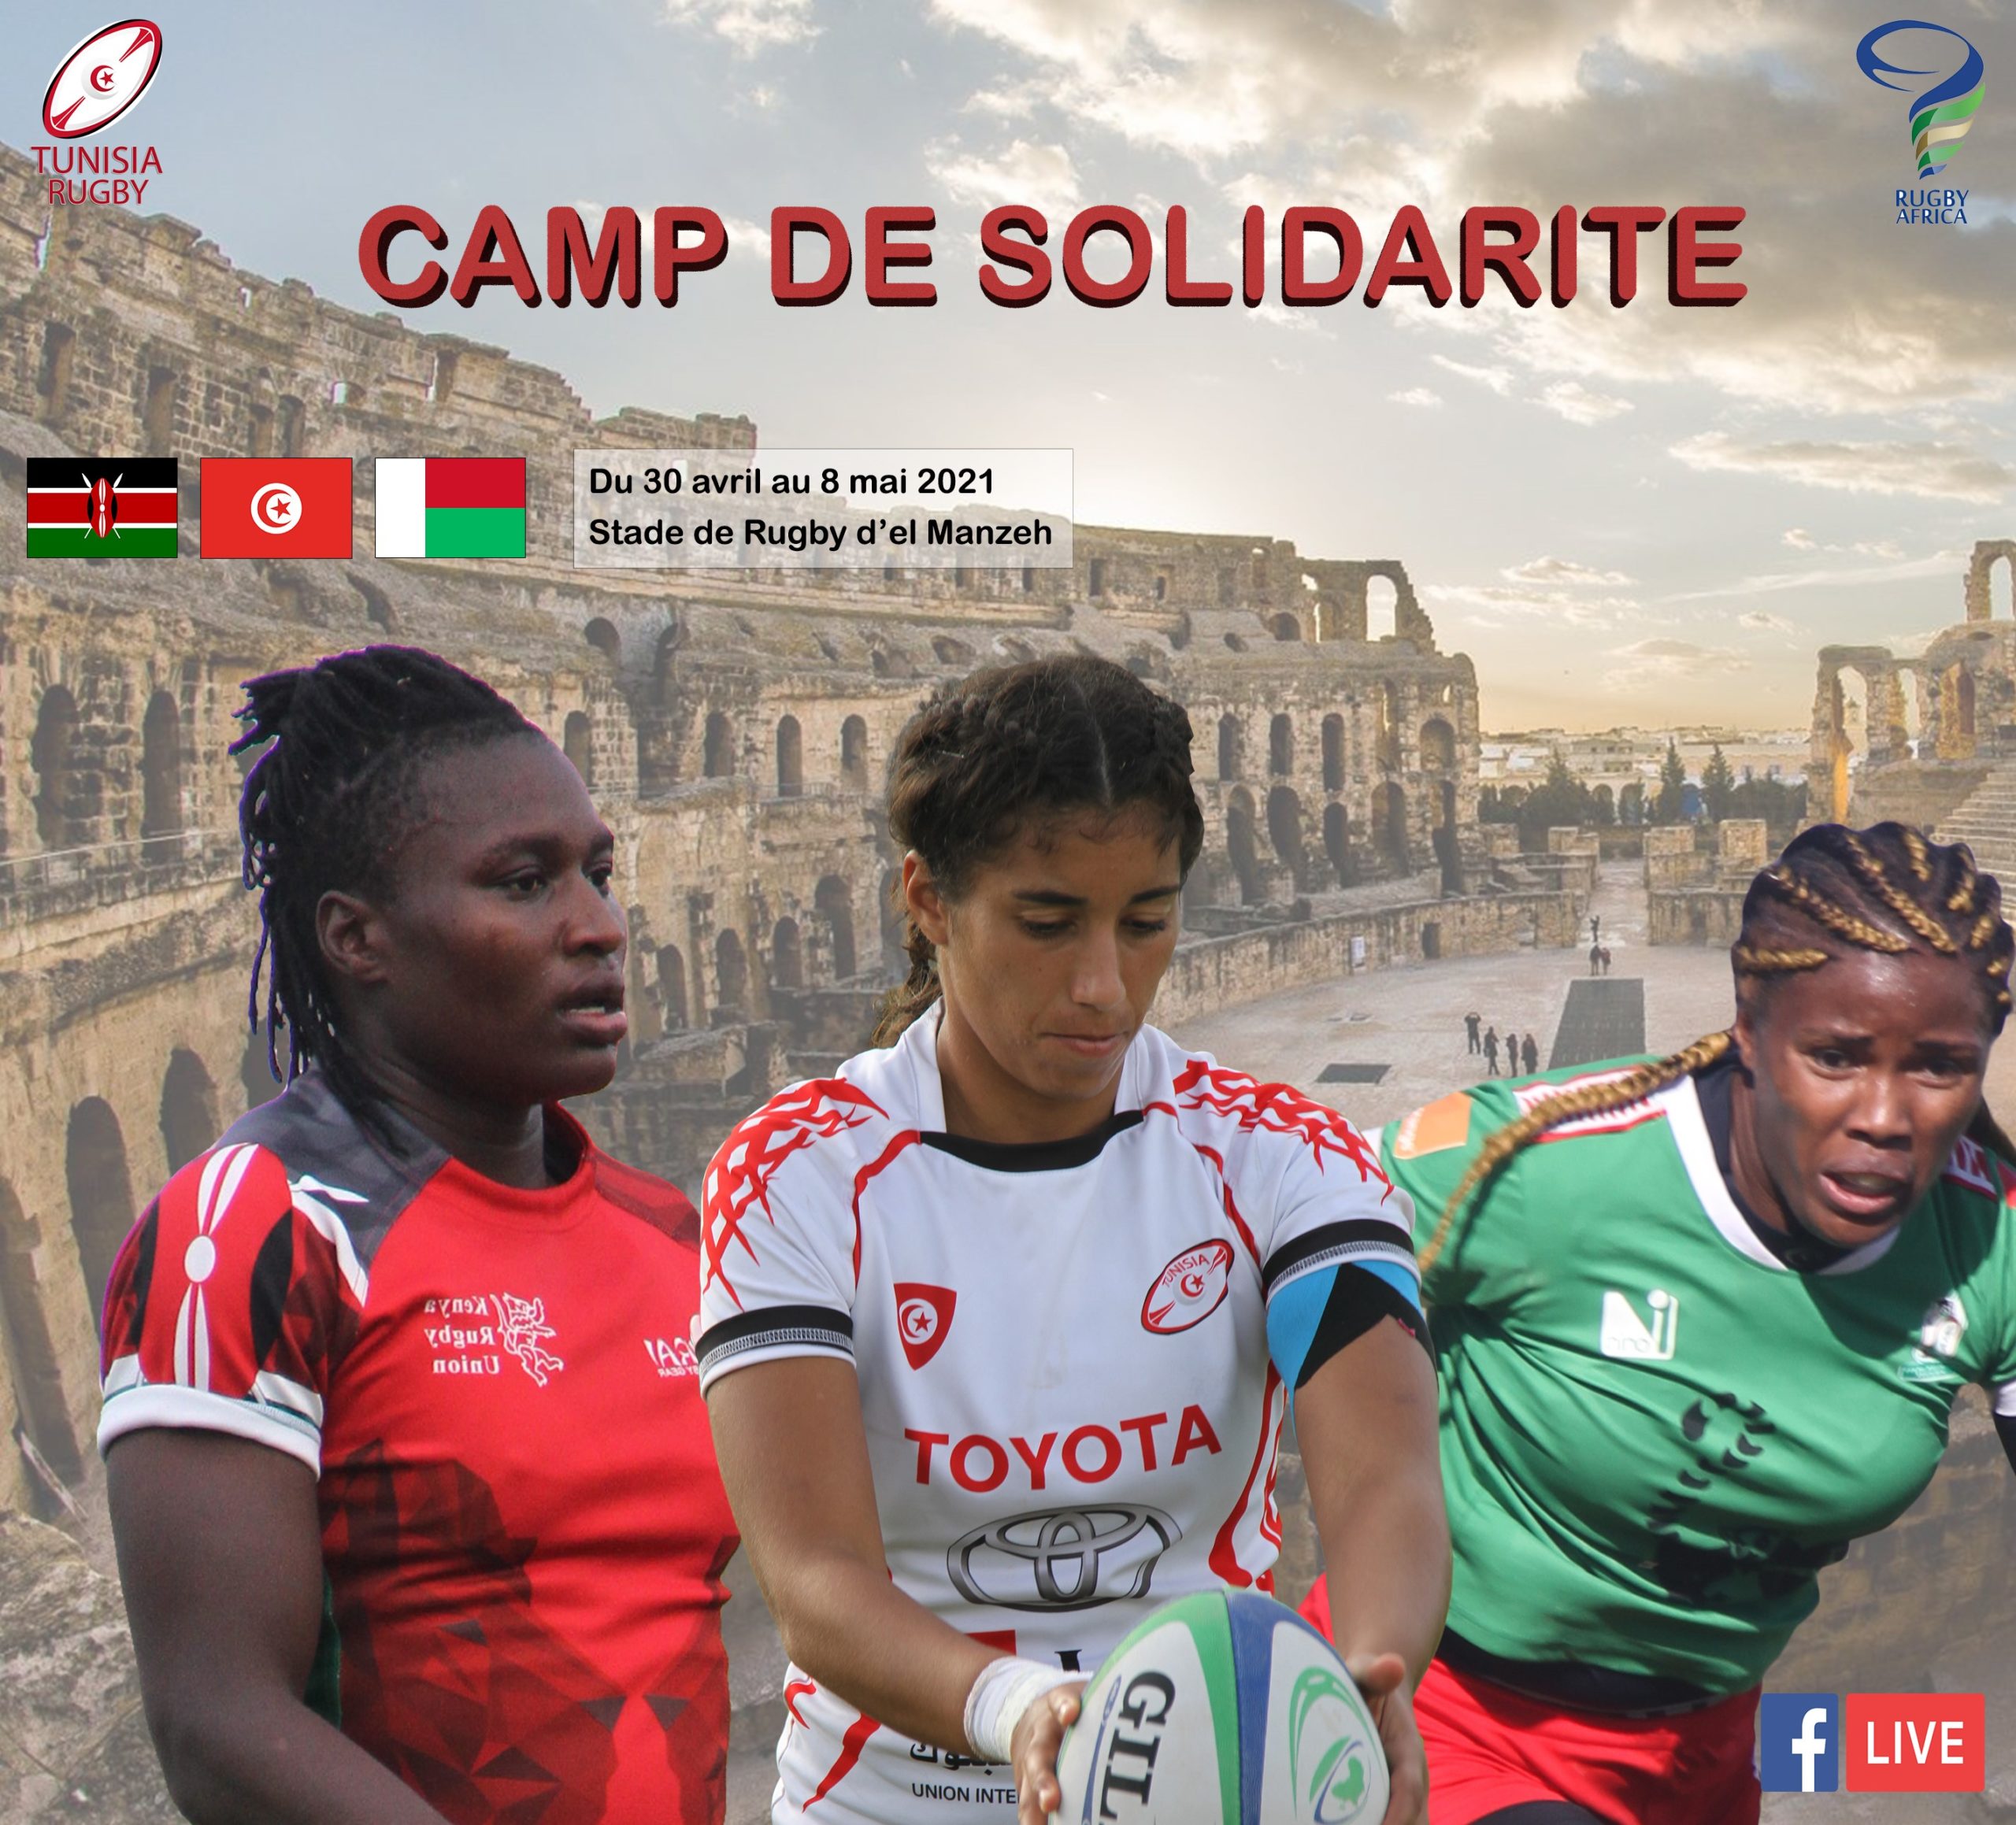 Tunisia Rugby - Womens Sevens Solidarity Camp - First tournament day report